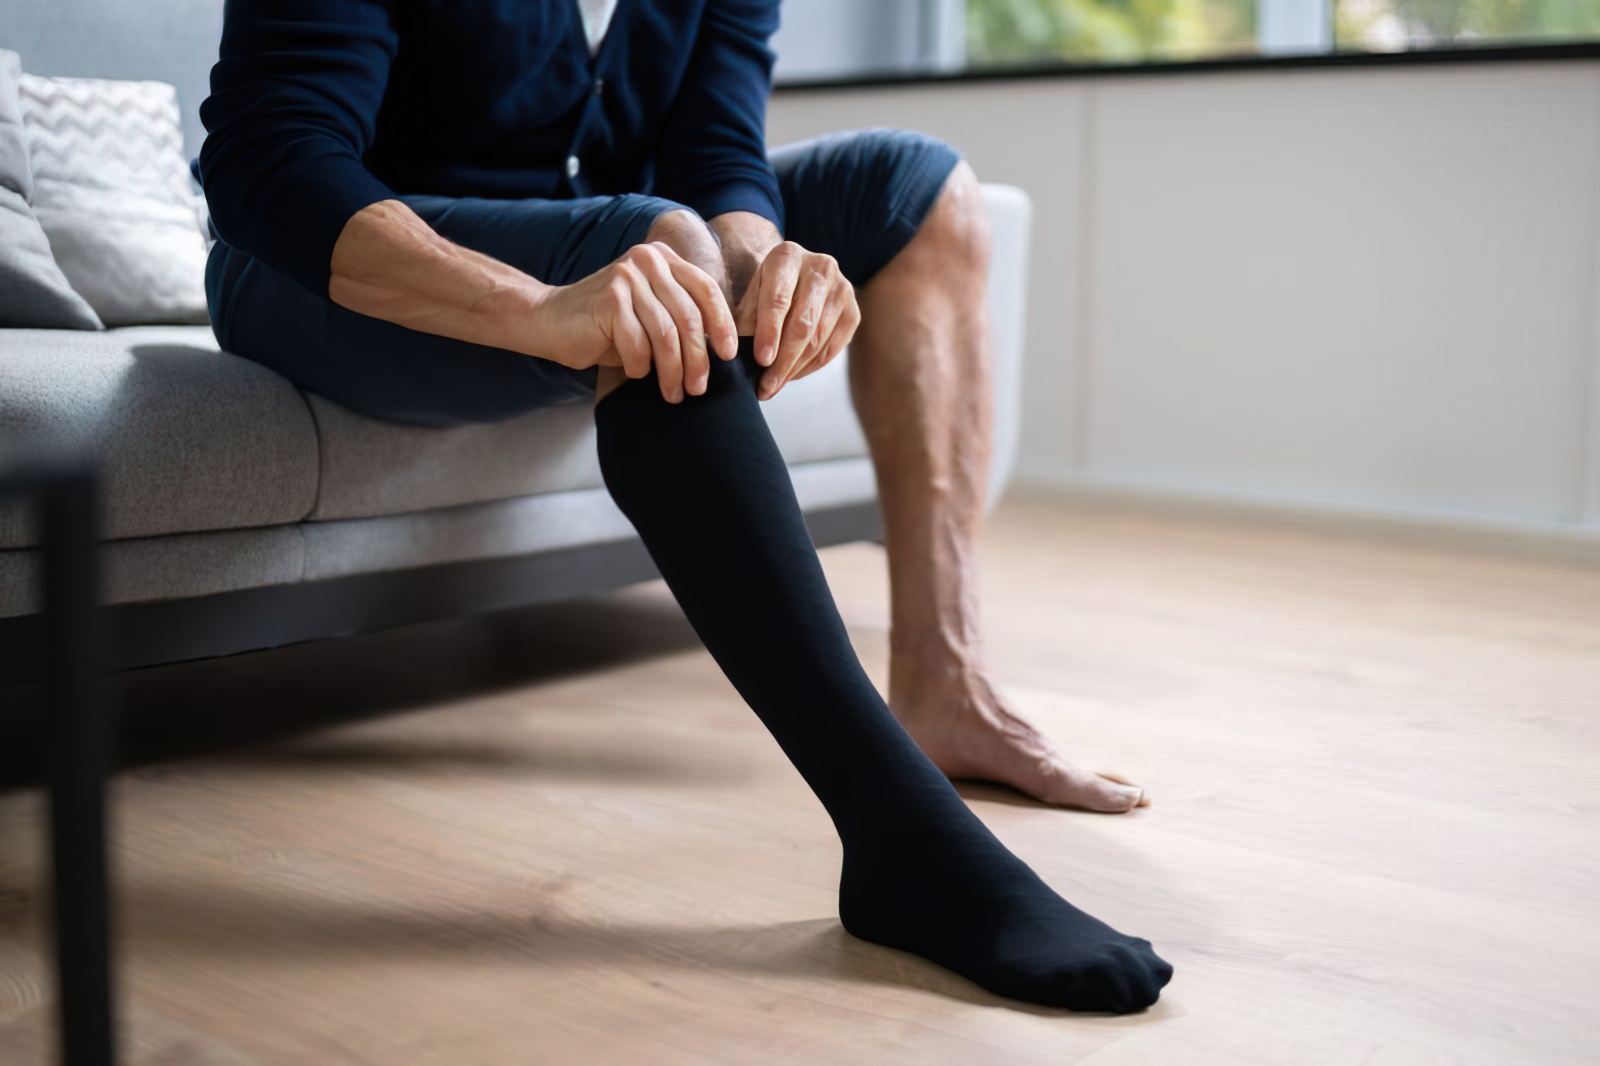 Compression stockings and socks